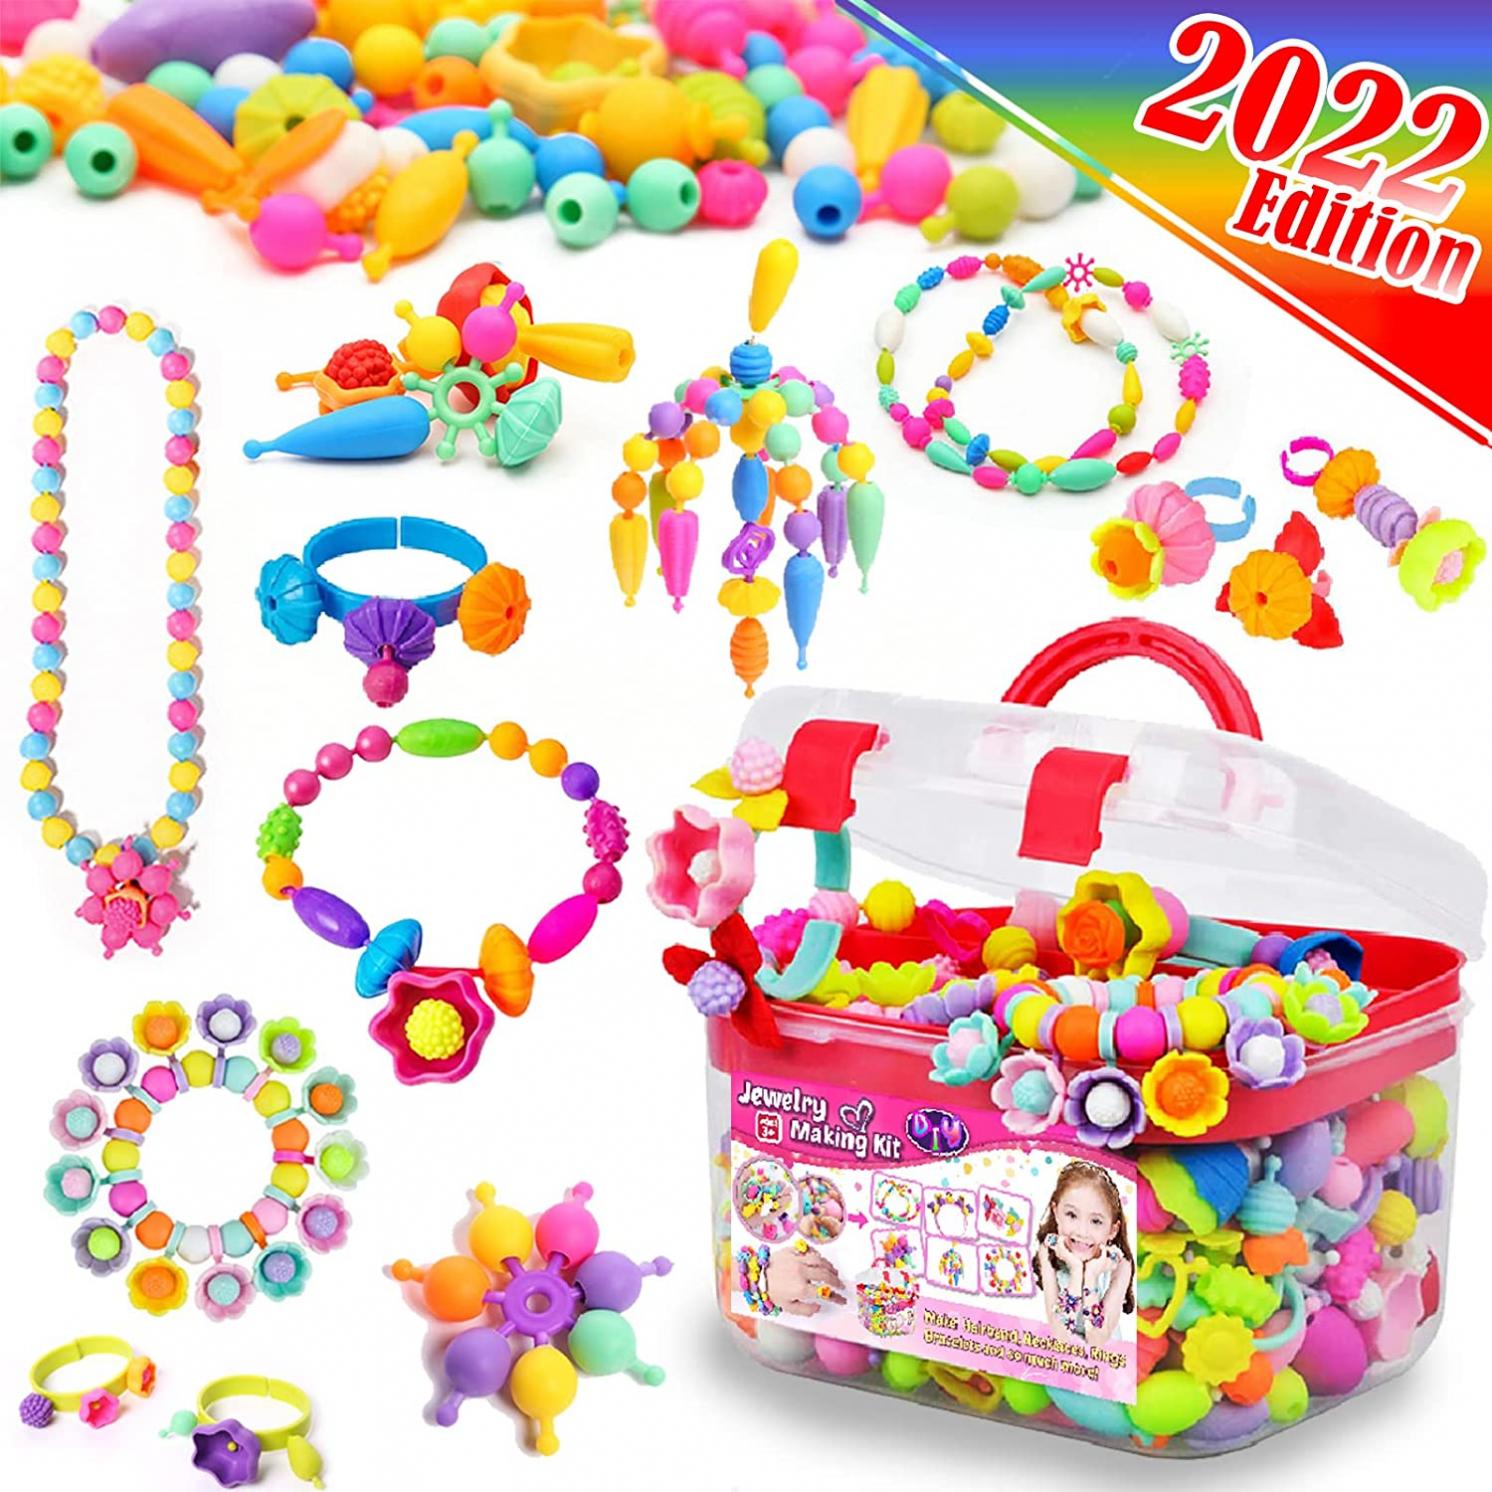 FUNZBO Snap Pop Beads for Girls Toys - Kids Jewelry Making Kit Pop-Bead Art and Craft Kits DIY Bracelets Necklace Hairband and Rings Toy for Age 3 4 5 6 7 8 Year Old Girl Christmas Birthday Gifts